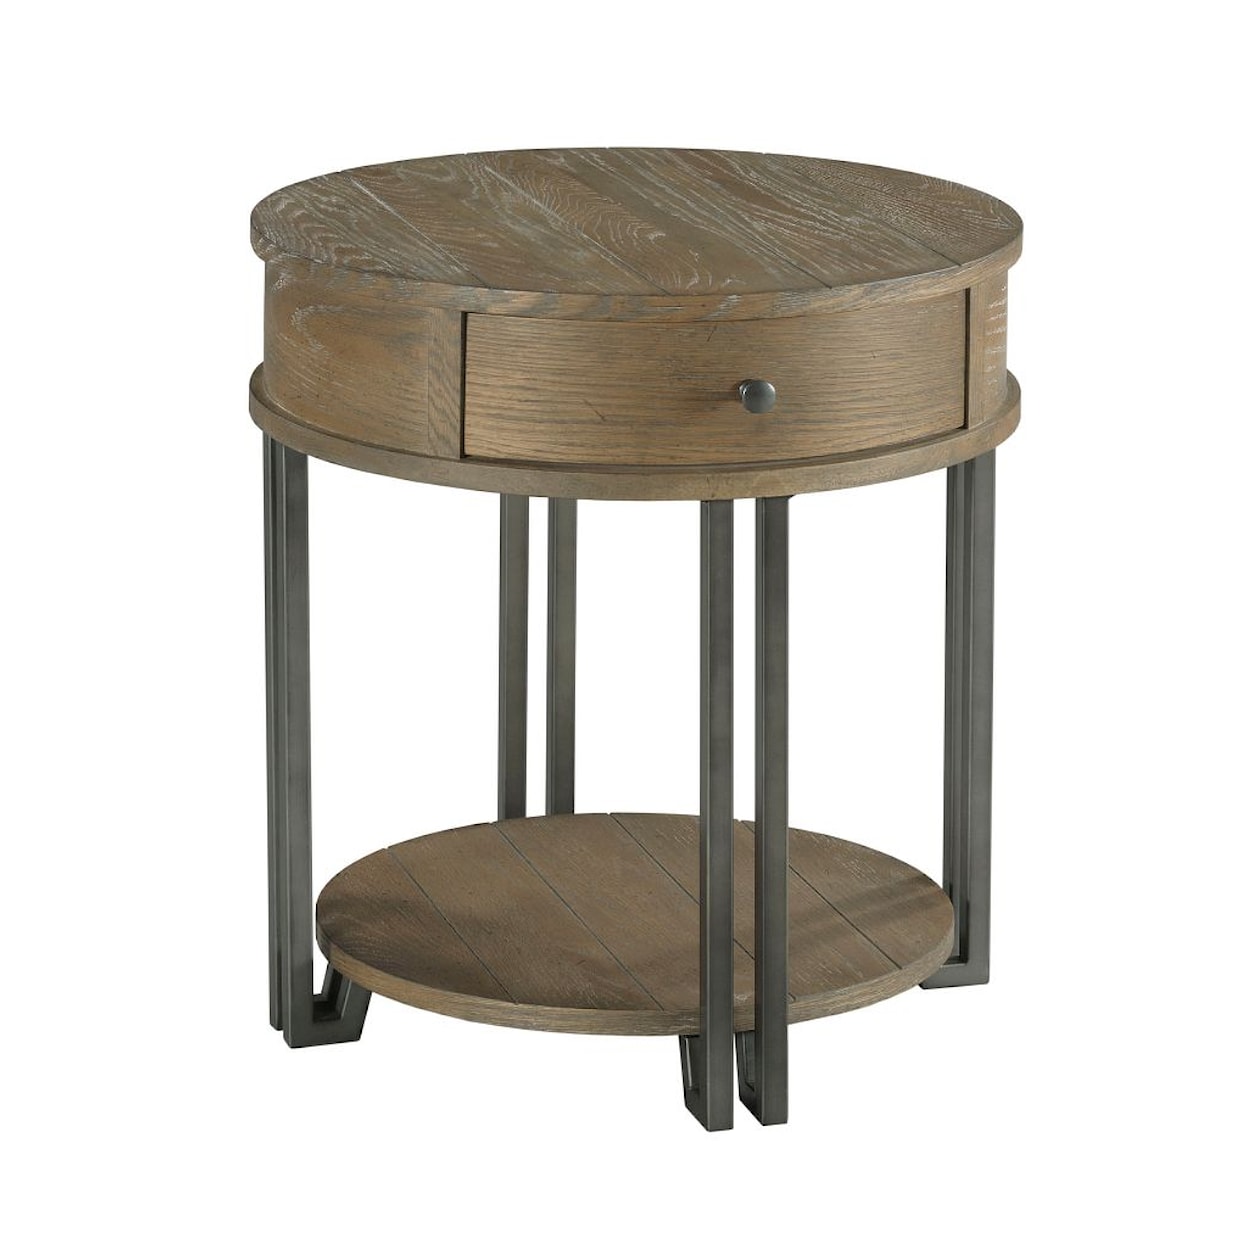 Hammary Saddletree Round Chairside Table